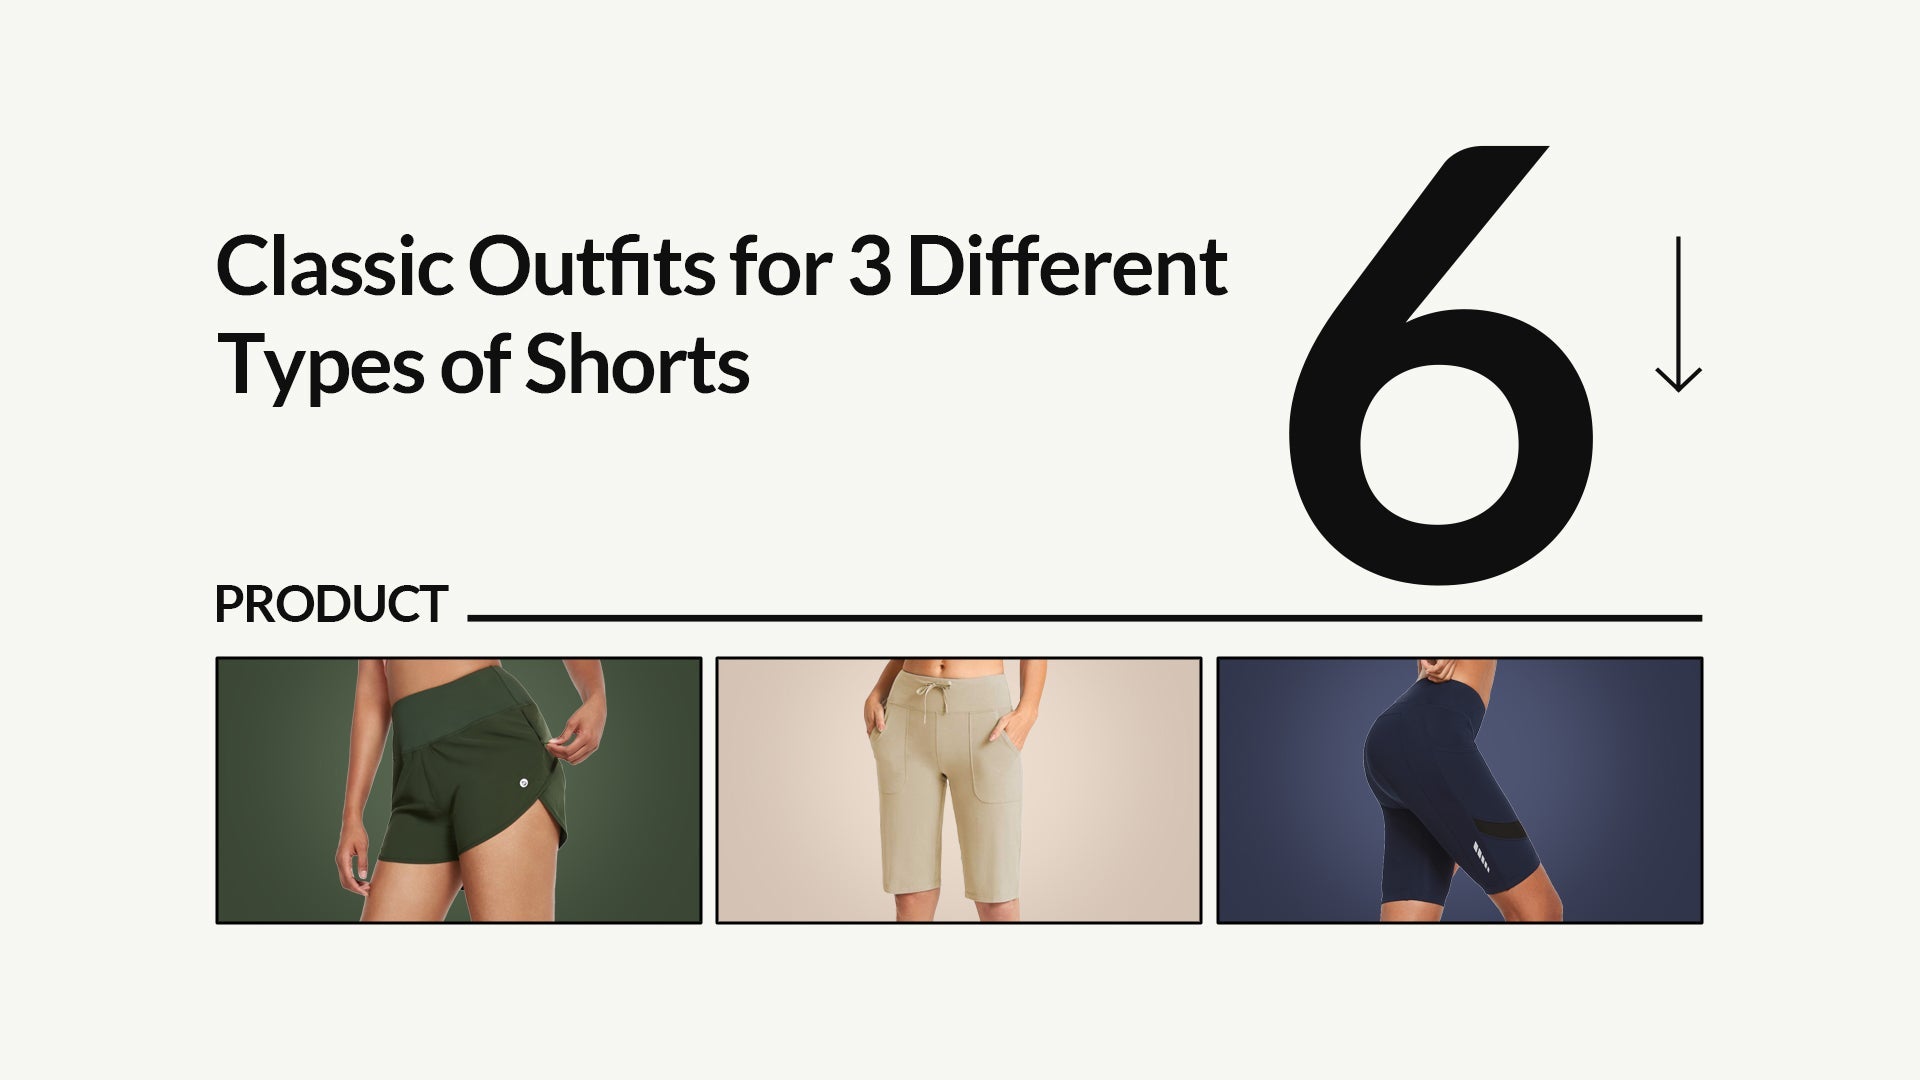 6 Classic Outfits for 3 Different Types of Shorts